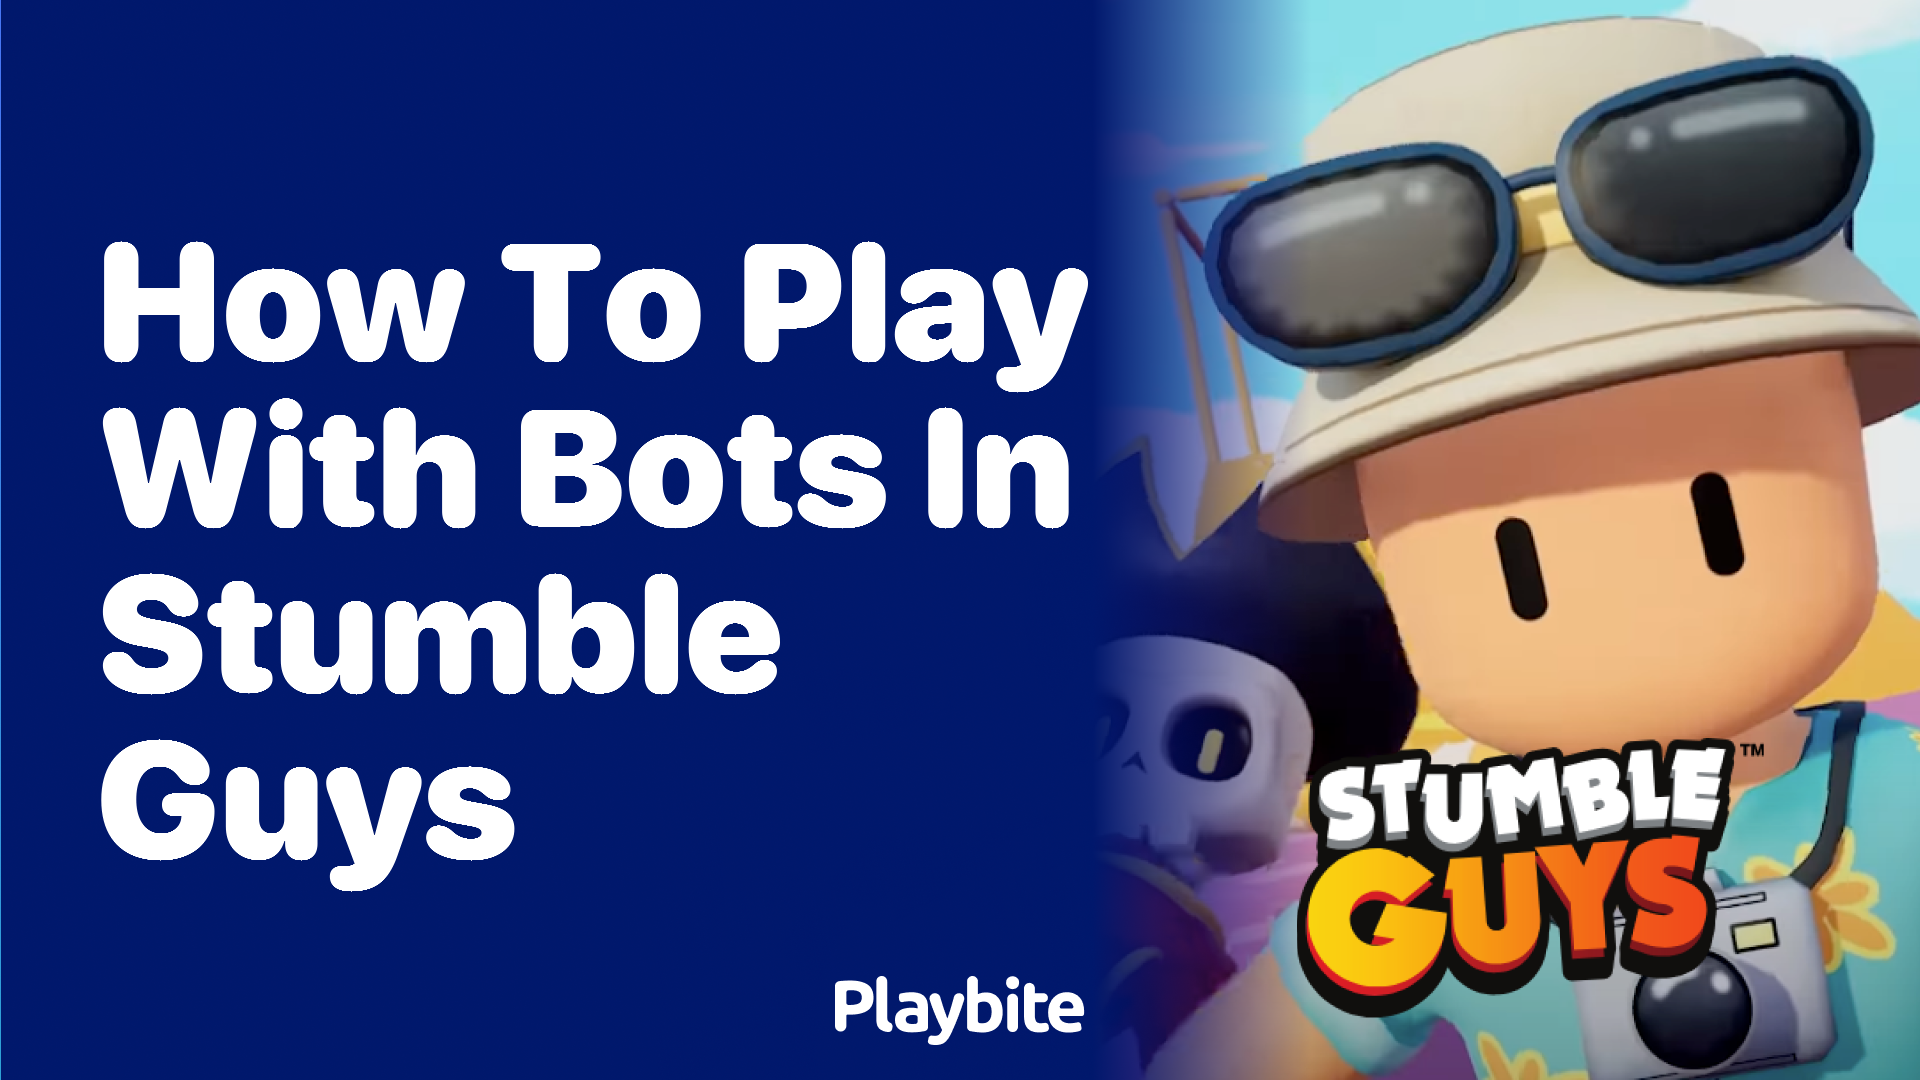 How to Play with Bots in Stumble Guys